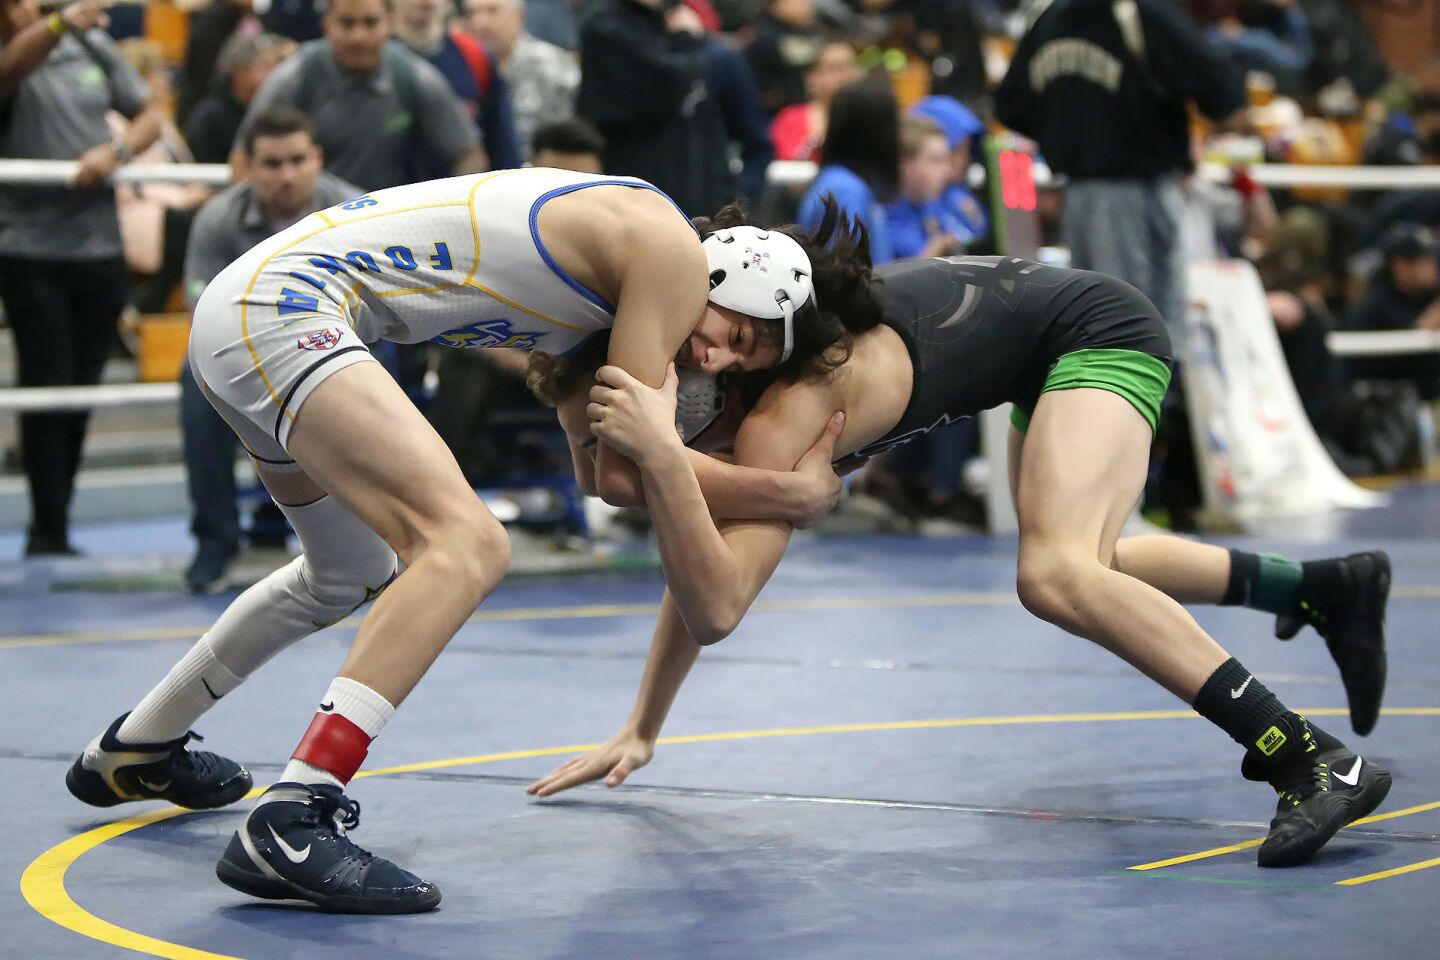 Fountain Valley’s Max Wilner wins title at Five Counties wrestling